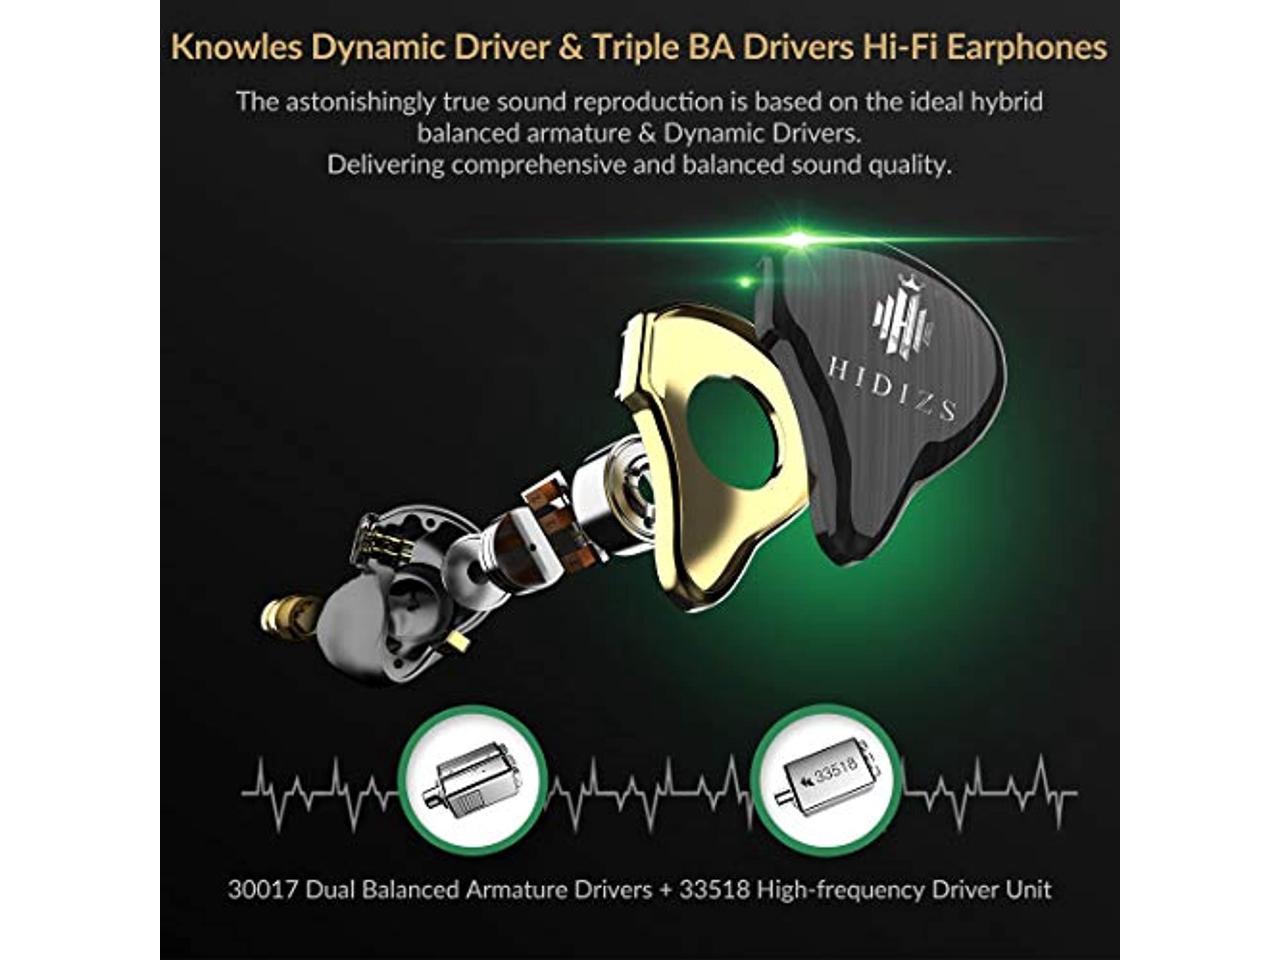 1 Dynamic + 3 Knowles BA Hi-Res Audio IEM Earphones with Detachable Cable Four Driver Hybrid HIDIZS MS4 HiFi in-Ear Monitor Headphones Black Noise-Isolating Musician Headset